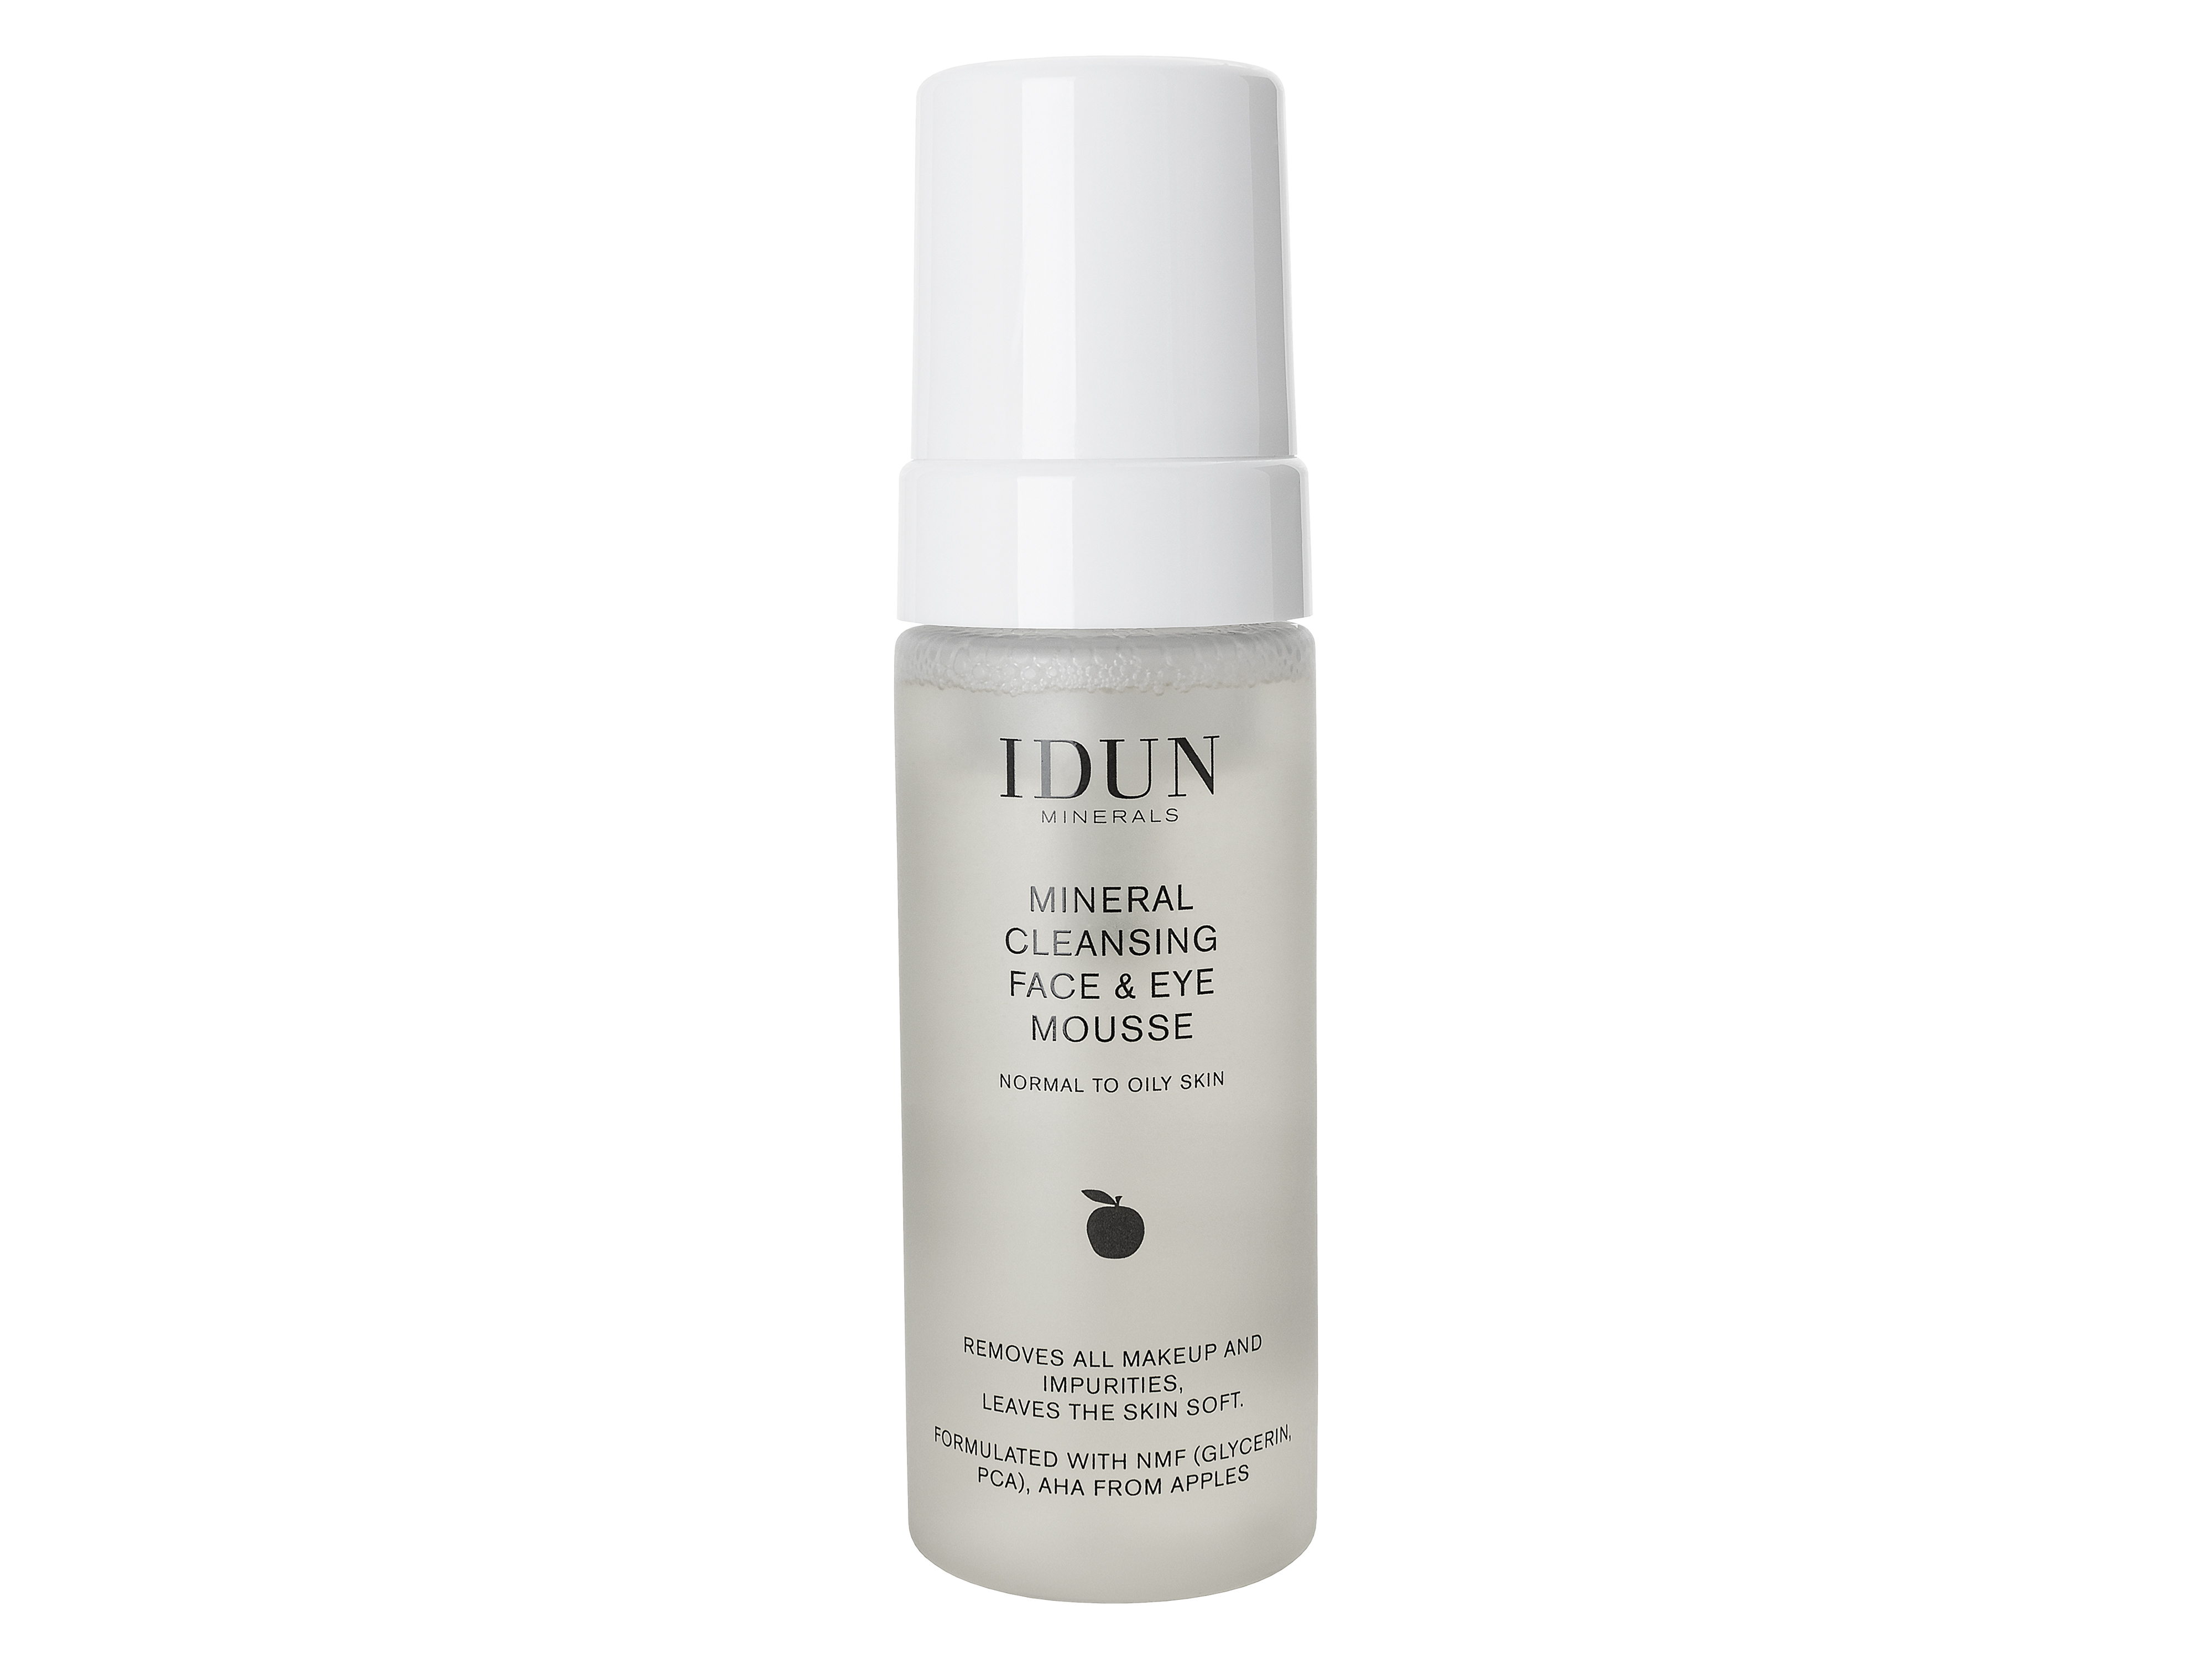 IDUN Minerals Skincare cleansing mousse, 150 ml